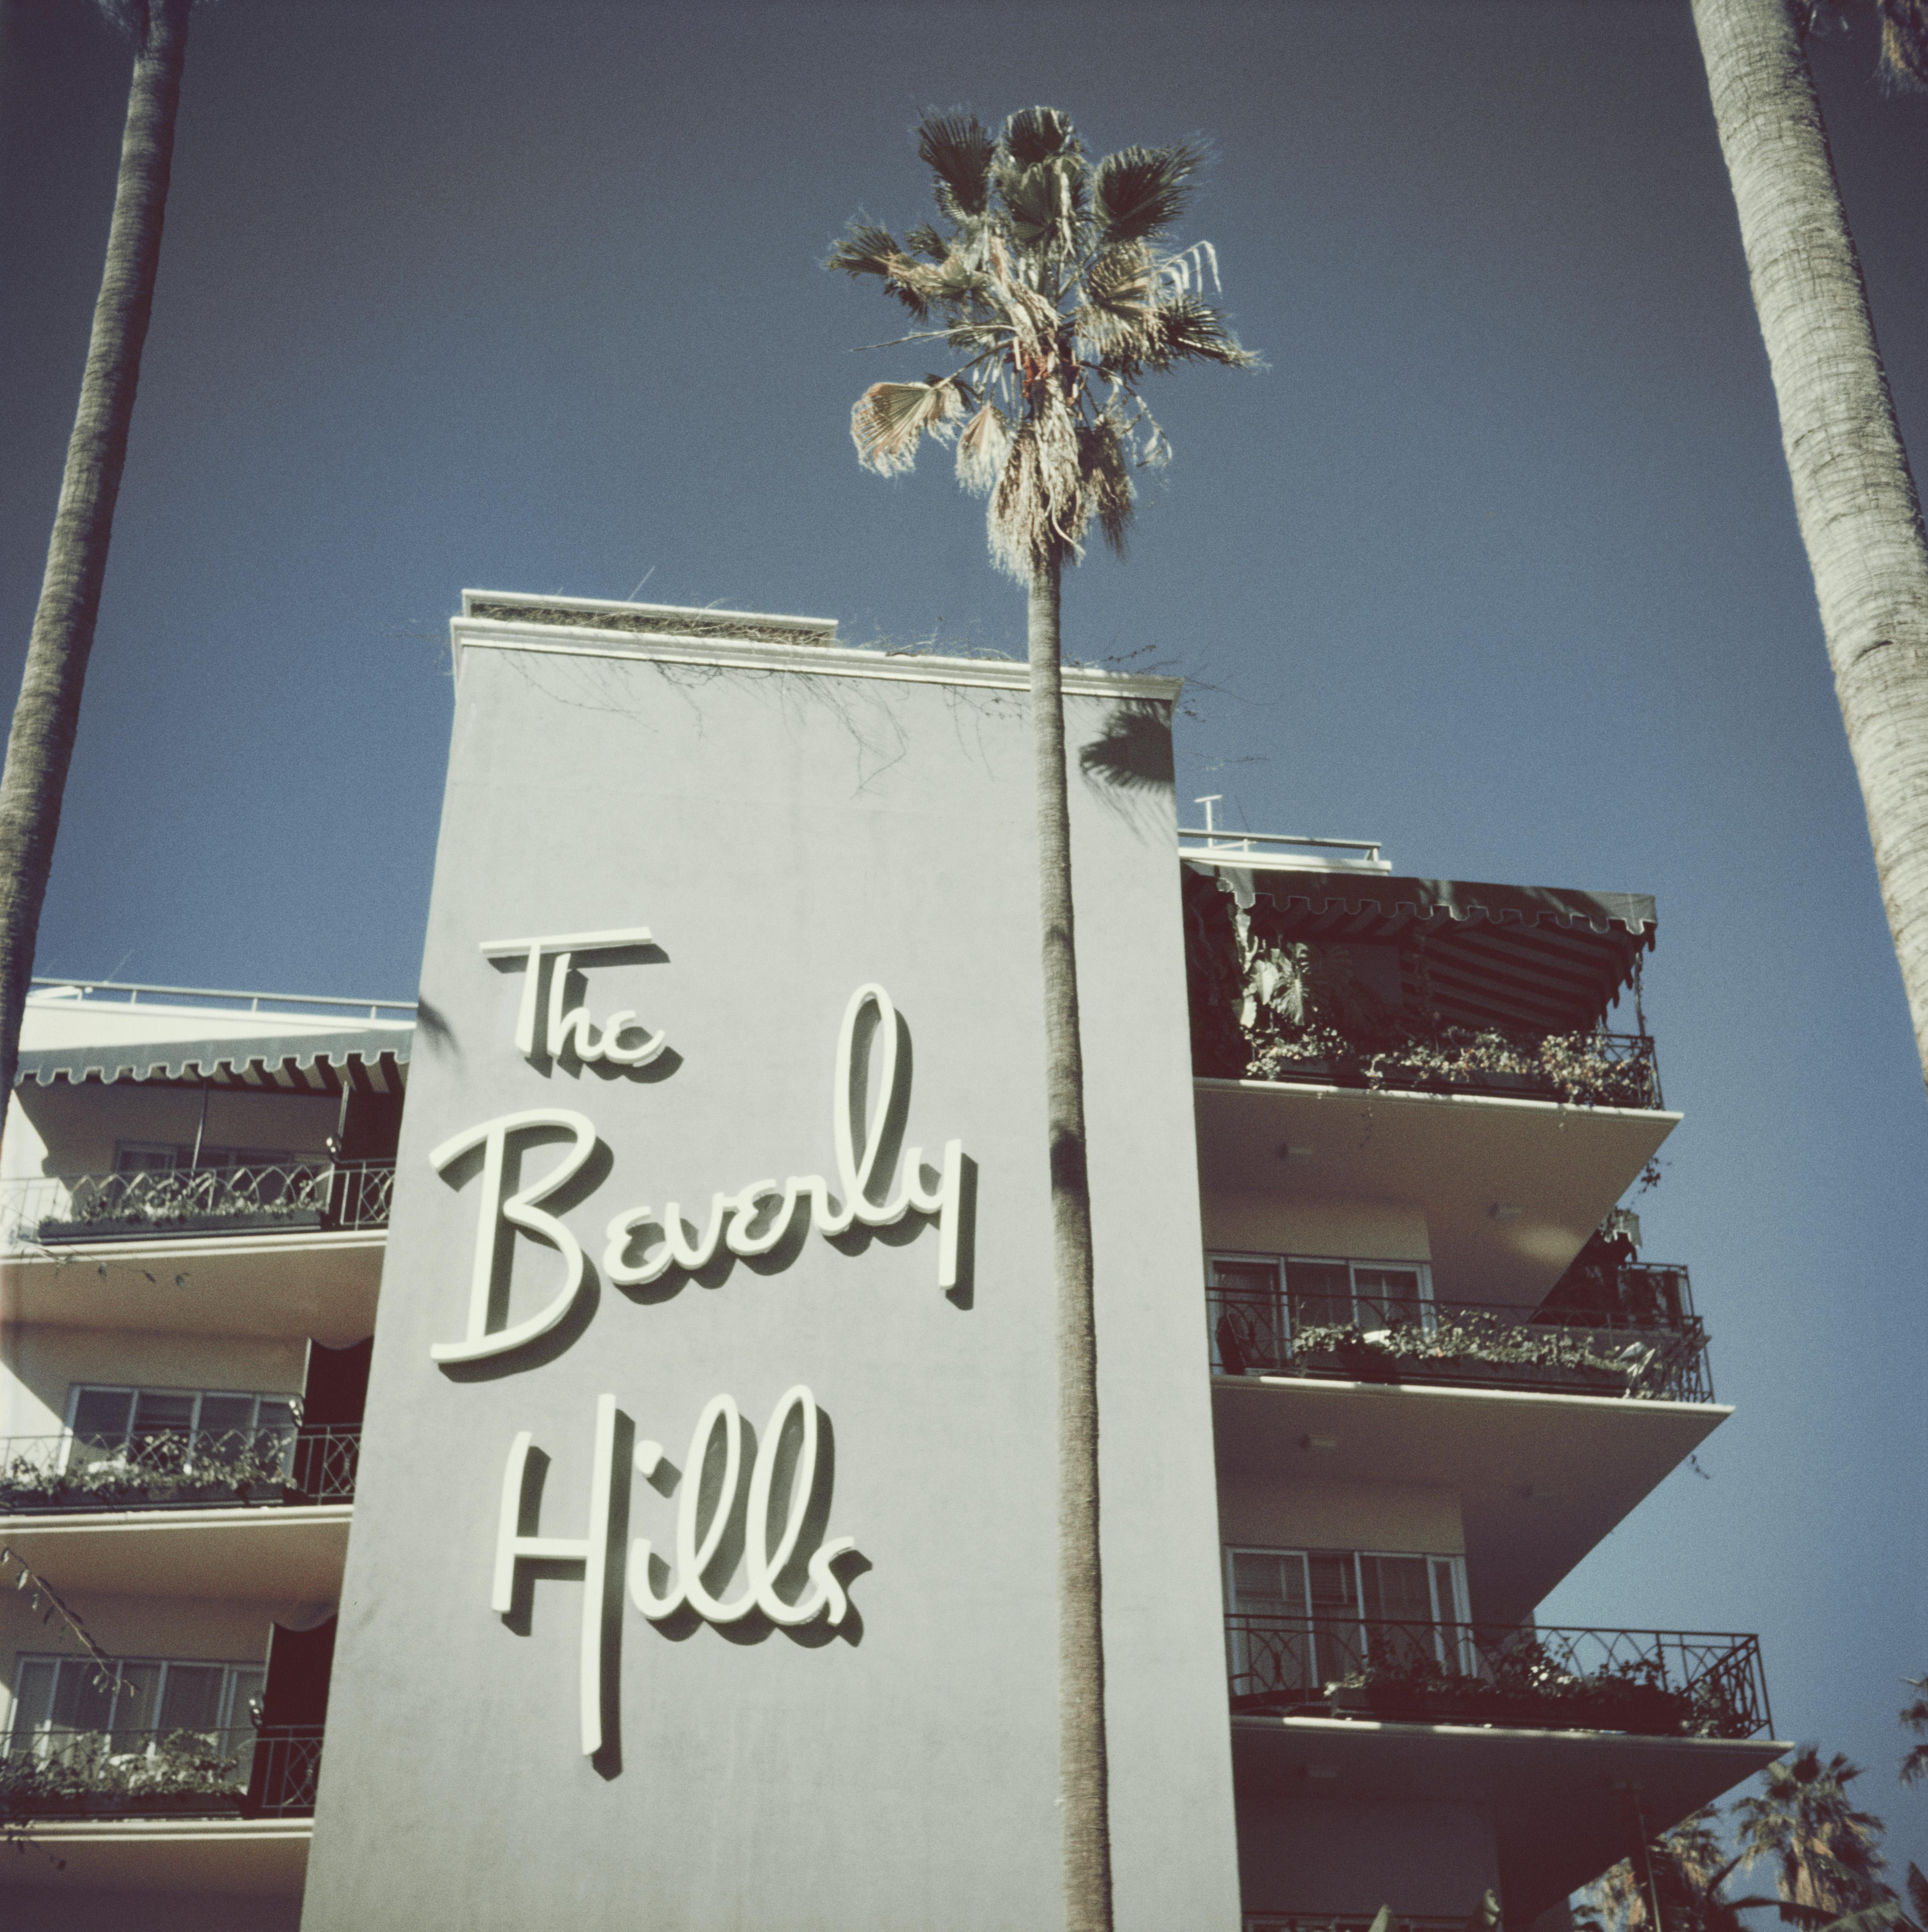 Beverly Hills Hotel
1957
C print
40 x 40 inches
Estate stamped and hand numbered edition of 150 with certificate of authenticity from the estate.   

The sign on the side of the Beverly Hills Hotel on Sunset Boulevard in California, 1957. (Photo by